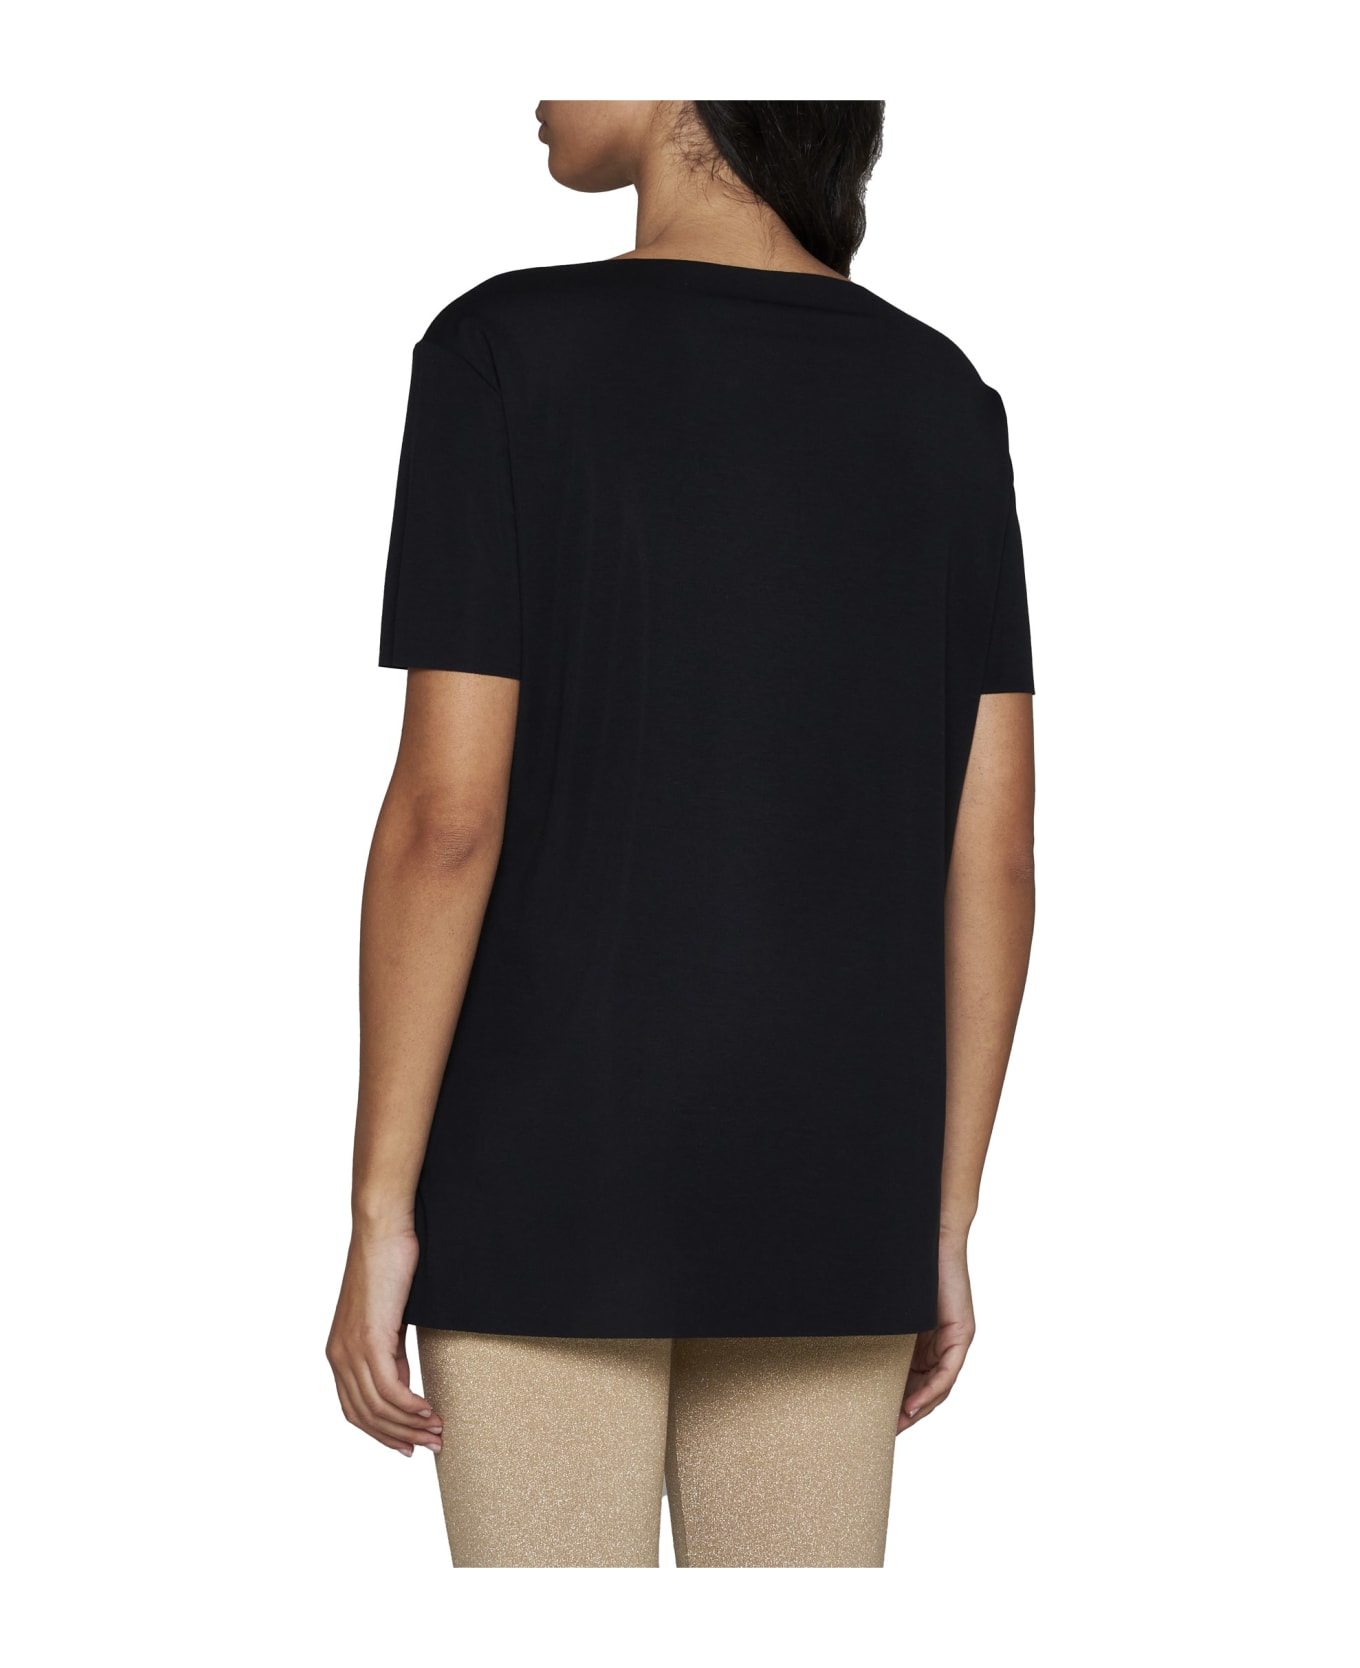 Wolford Top - Black Tシャツ